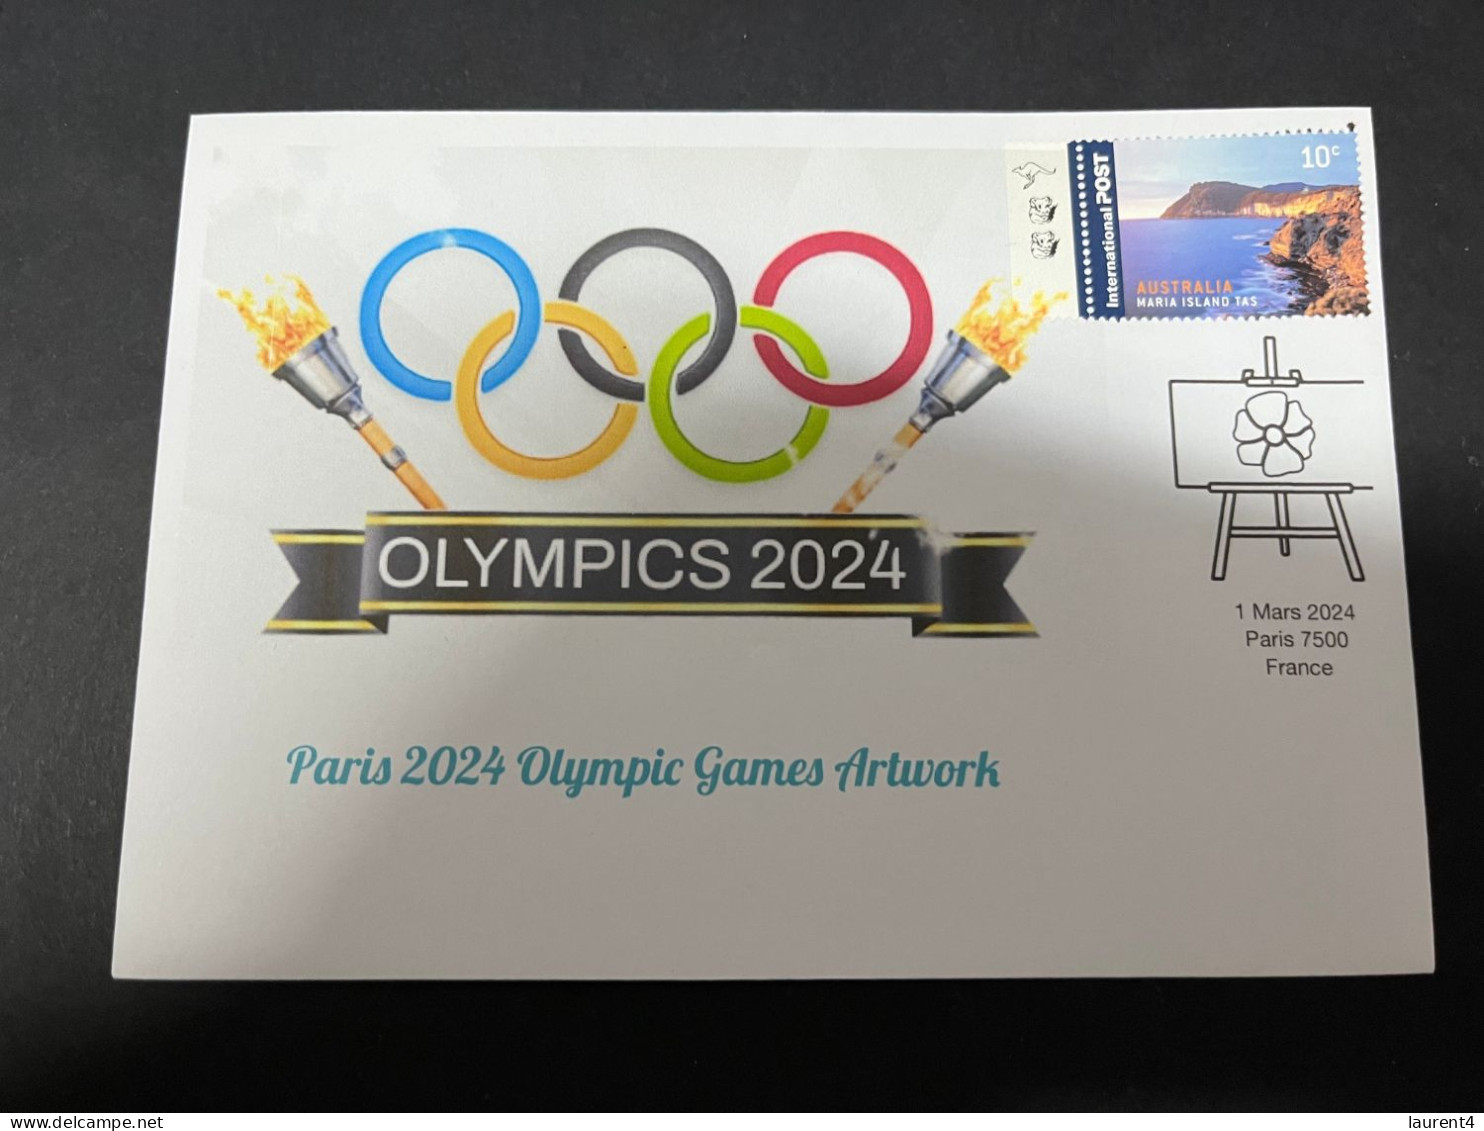 11-3-2024 (2 Y 43) Paris Olympic Games 2024 - 8 (of 12 Covers Series) For The Paris 2024 Olympic Games Artwork - Sommer 2024: Paris